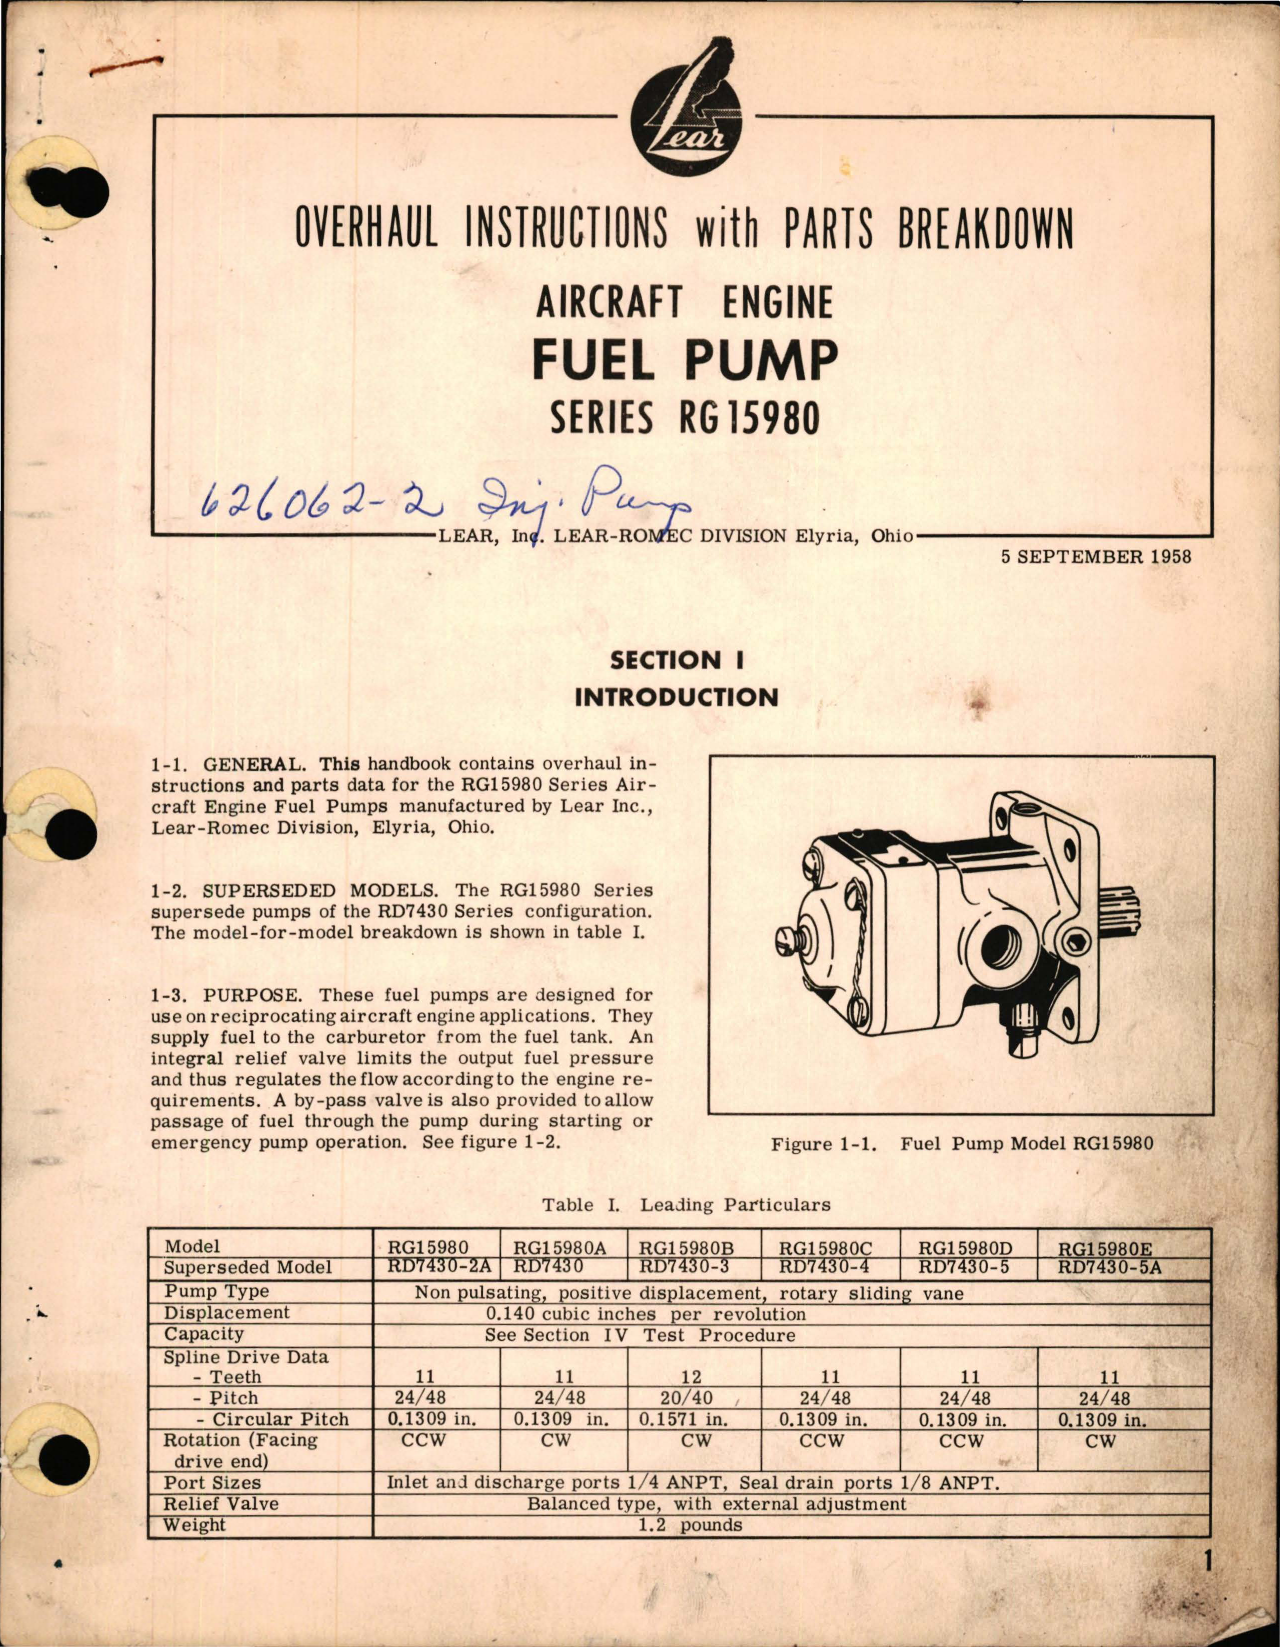 Sample page 1 from AirCorps Library document: Overhaul Instructions with Parts Breakdown for Aircraft Engine Fuel Pump - Series RG15980 